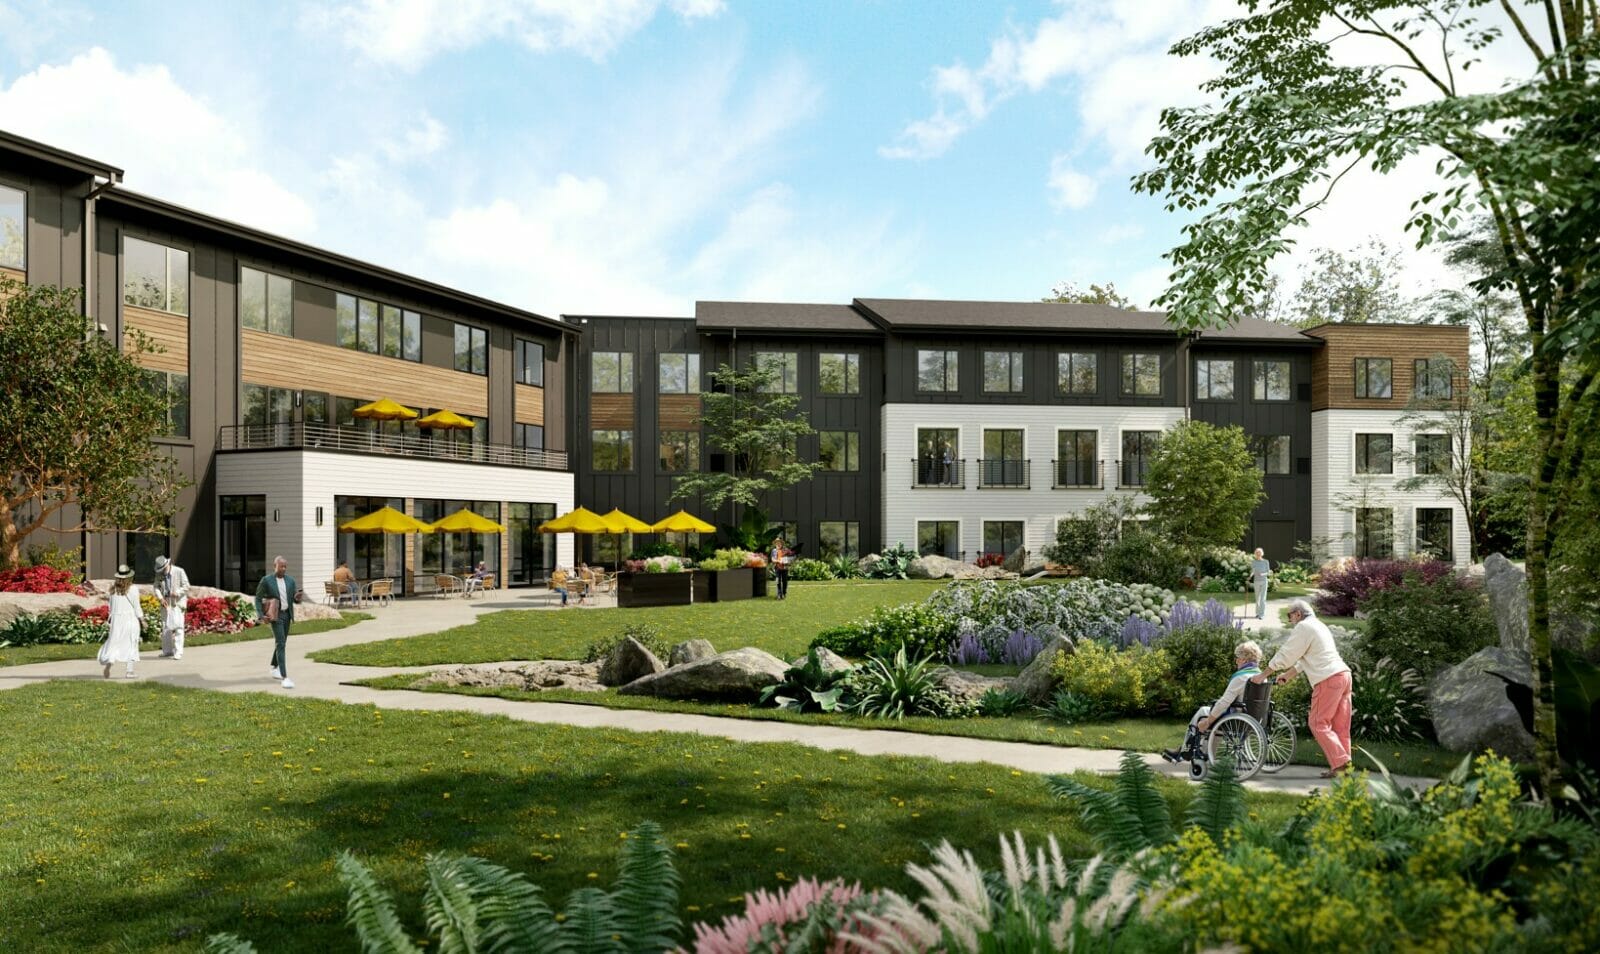 The Gallery at Spokane Exterior Rendering Spokane Washington Independent Assisted Living and Memory Care. Walking paths and landscaped grounds.